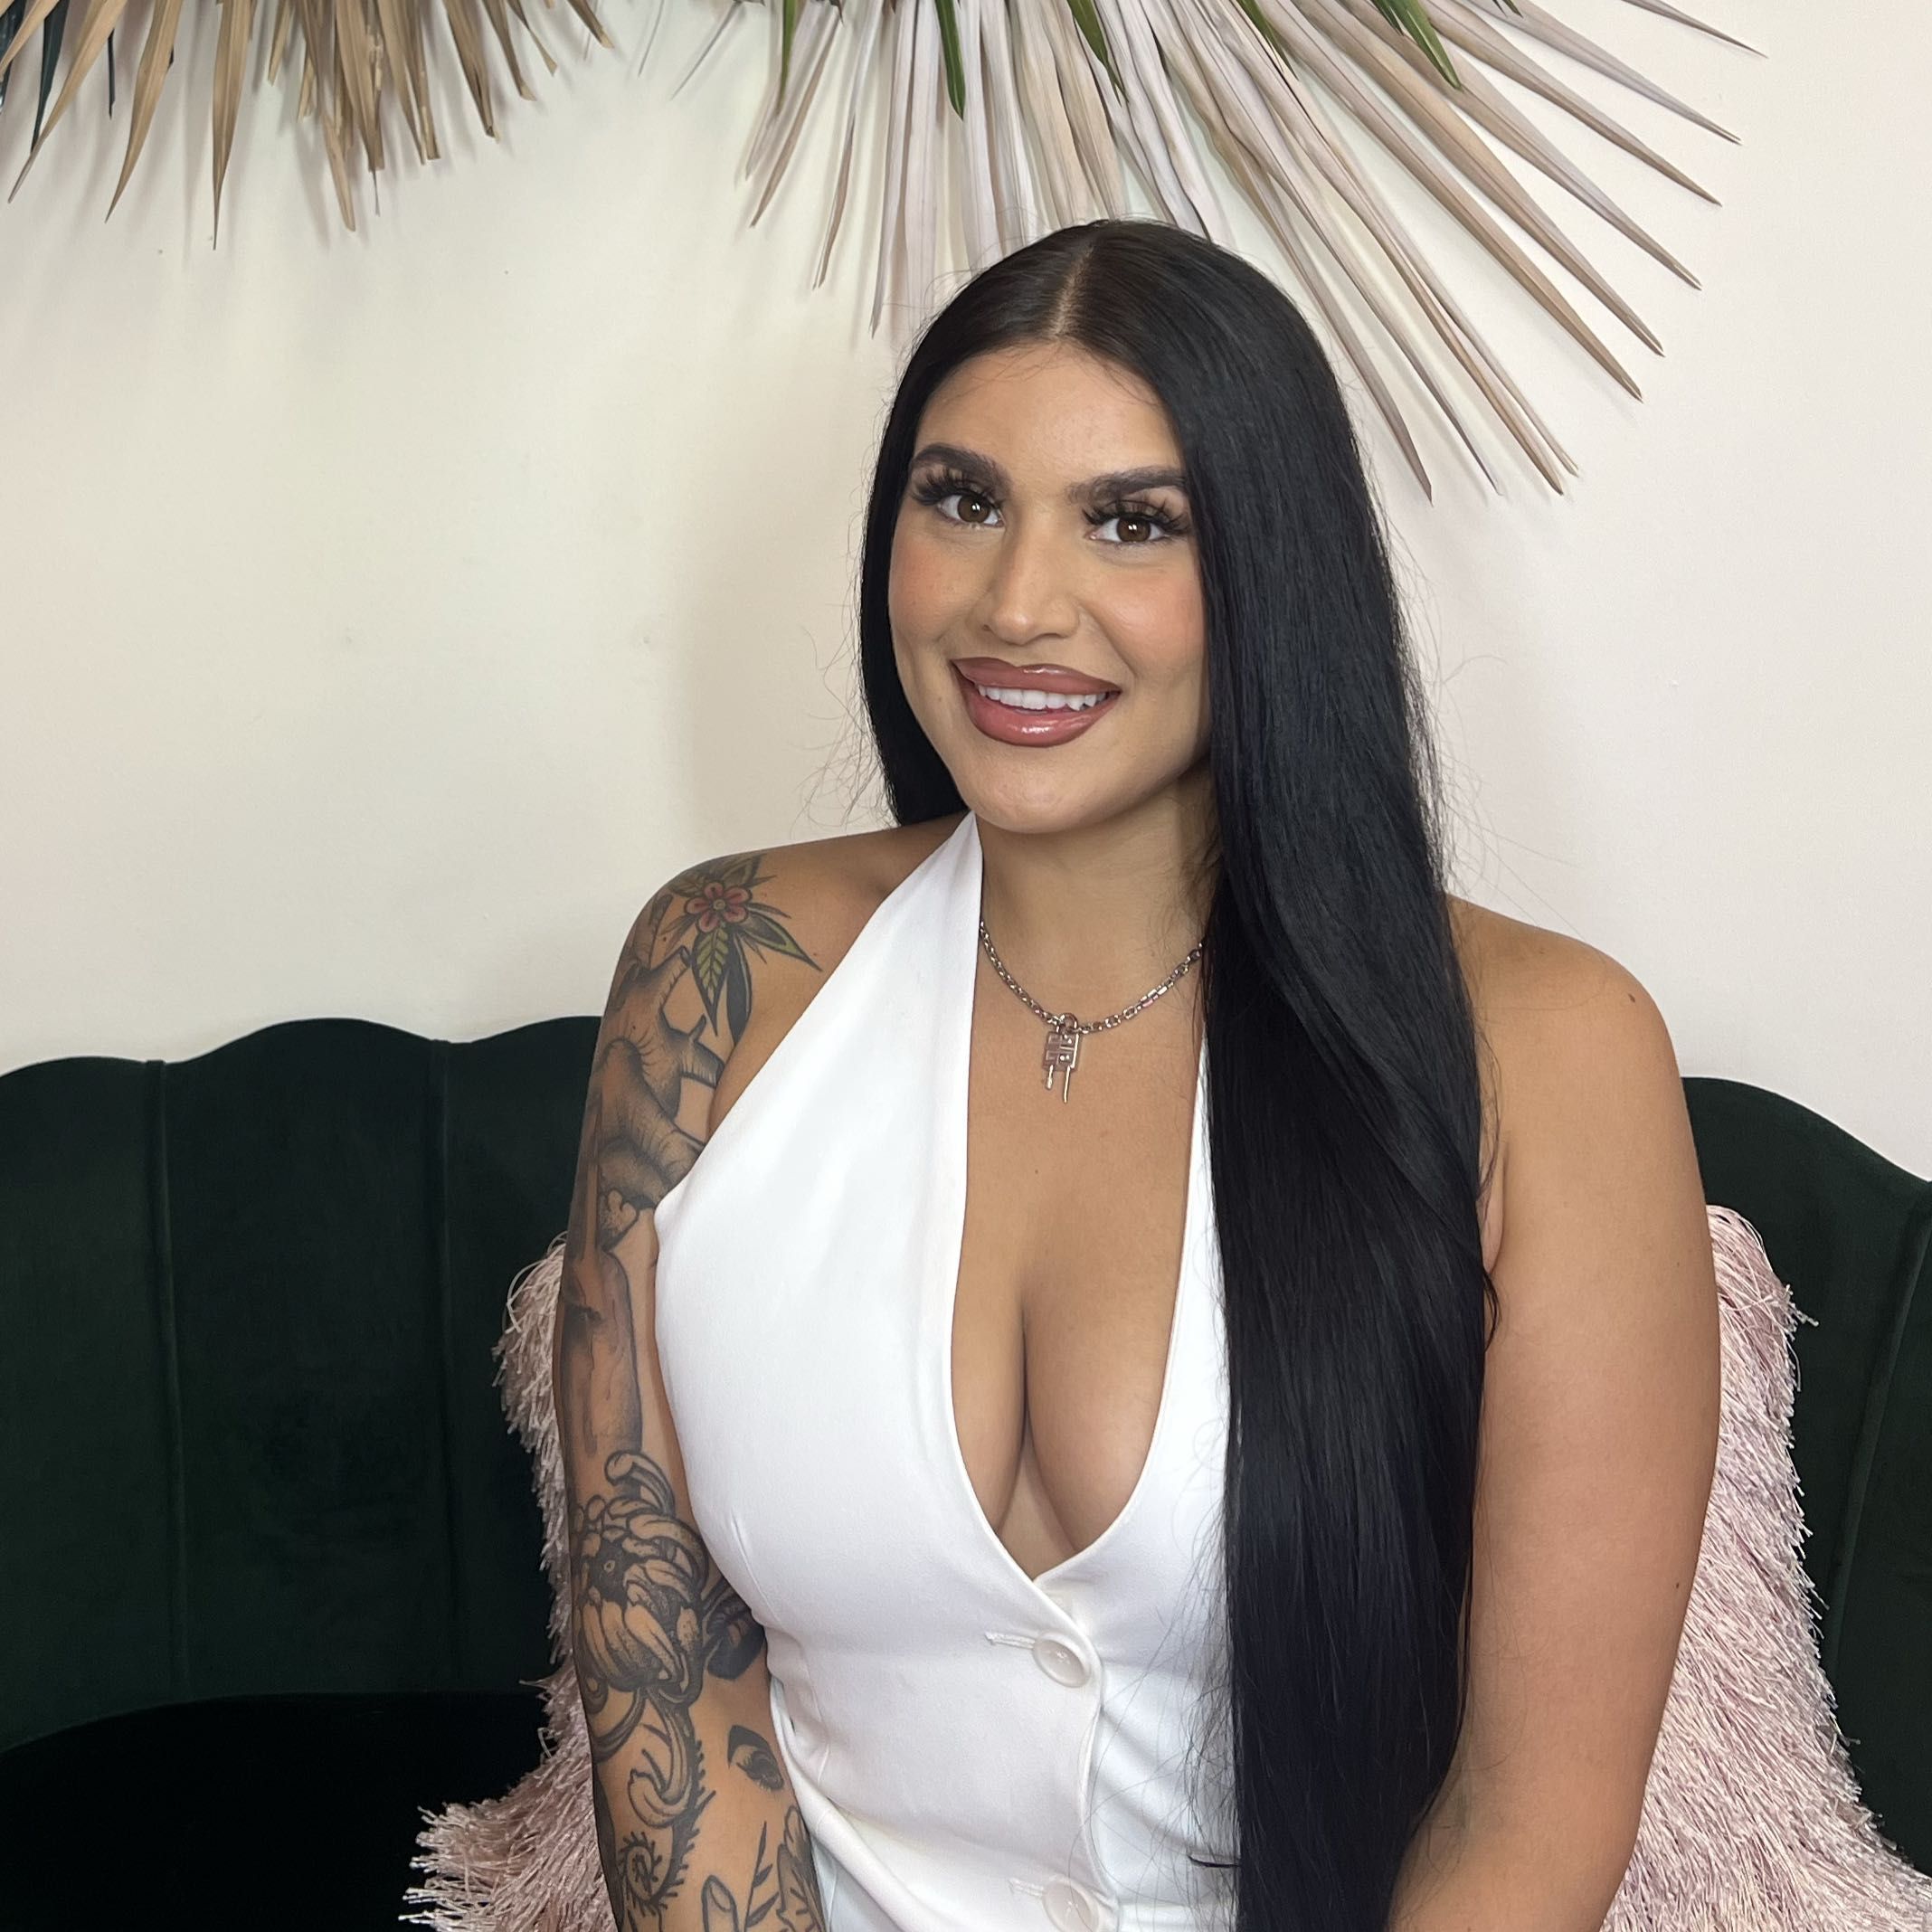 Gianna Salerno WPB - Maybelle Beauty Bar